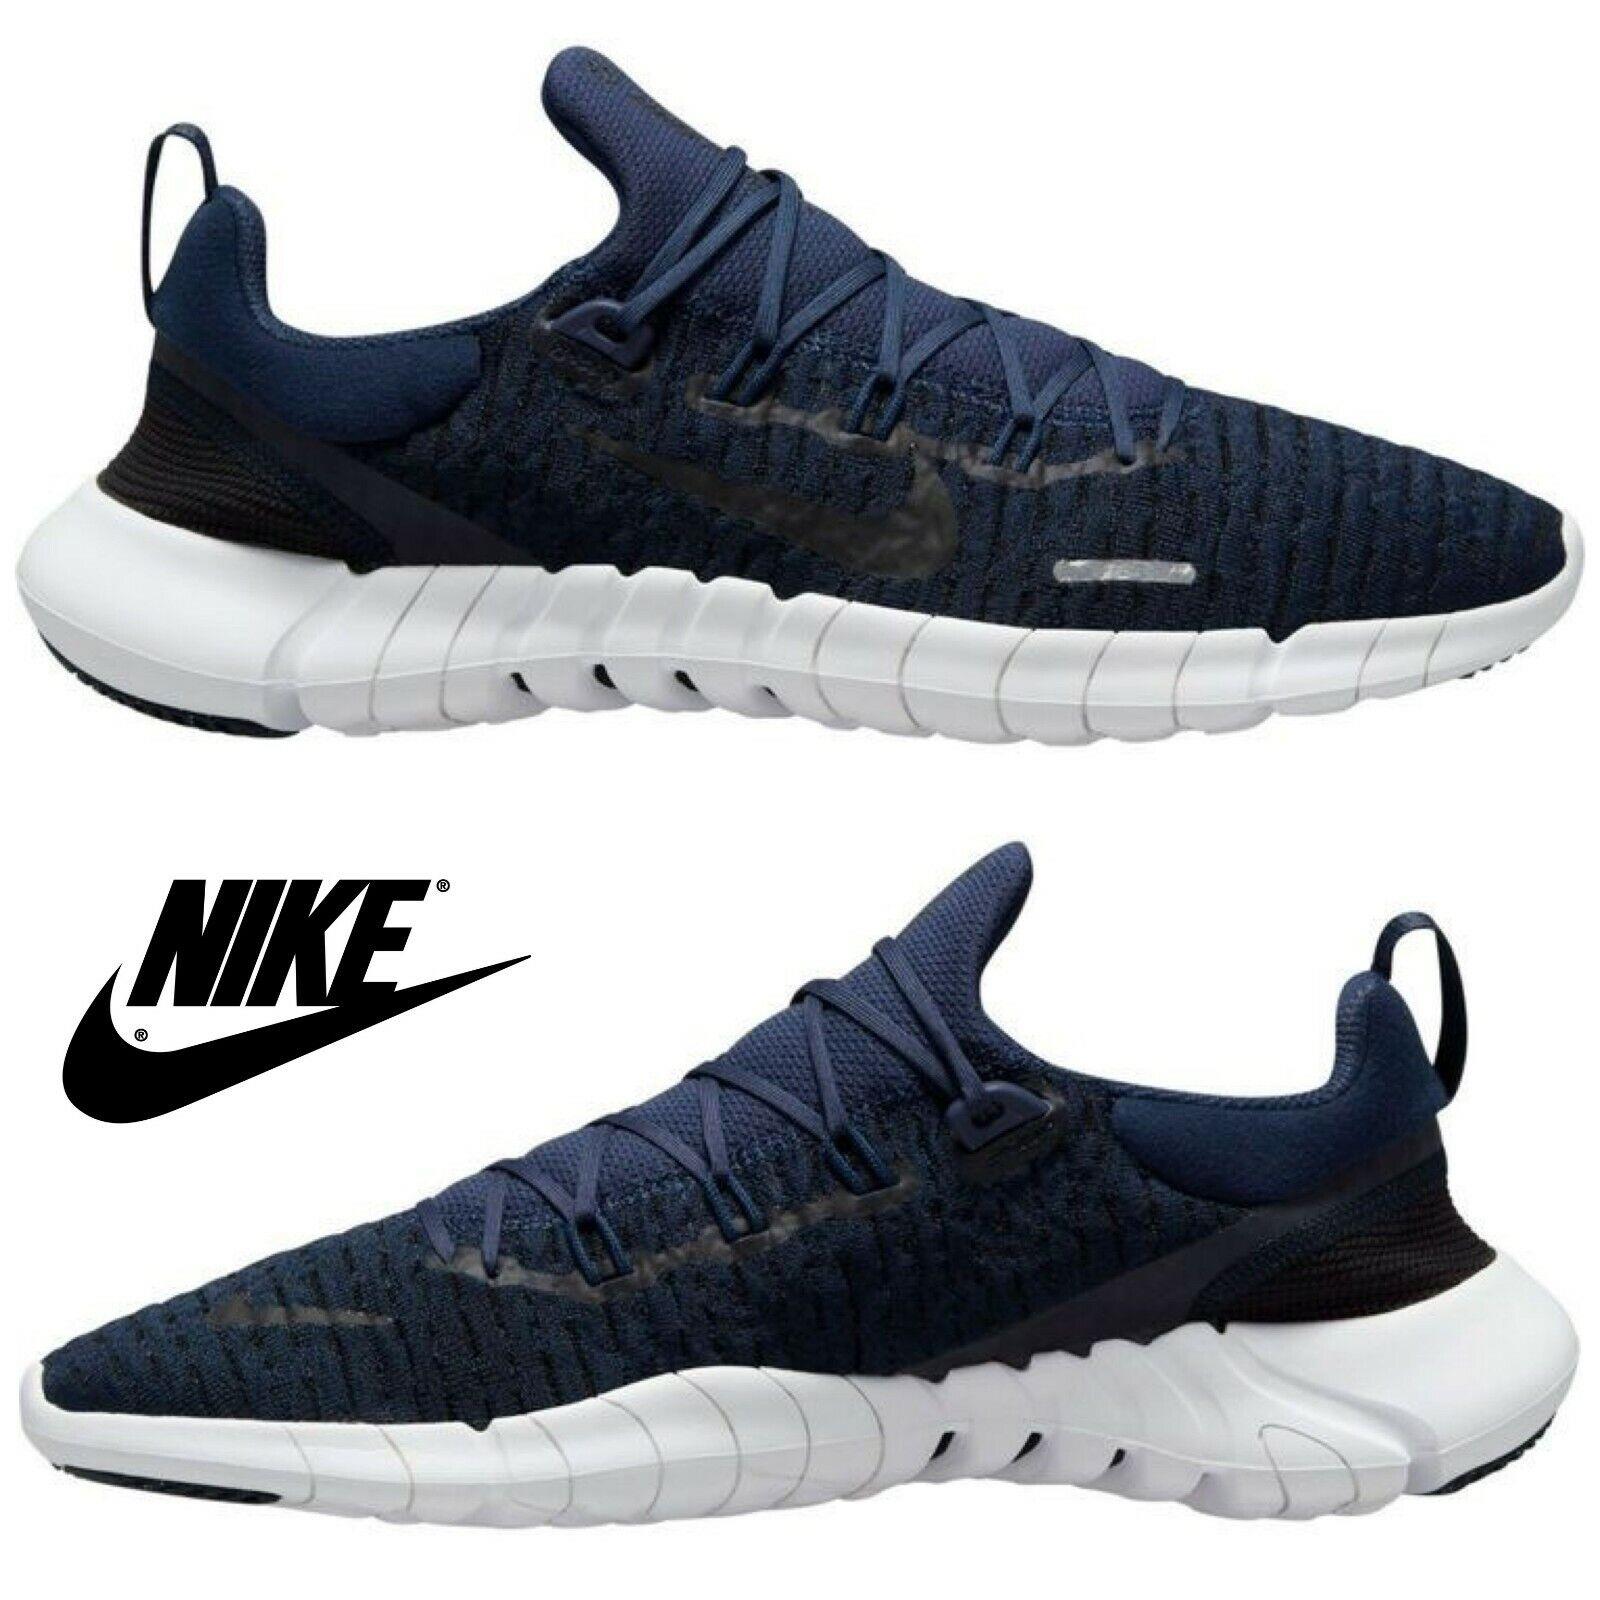 Nike Men`s Free Run 5.0 Running Shoes Training Athletic Sport Casual Sneakers